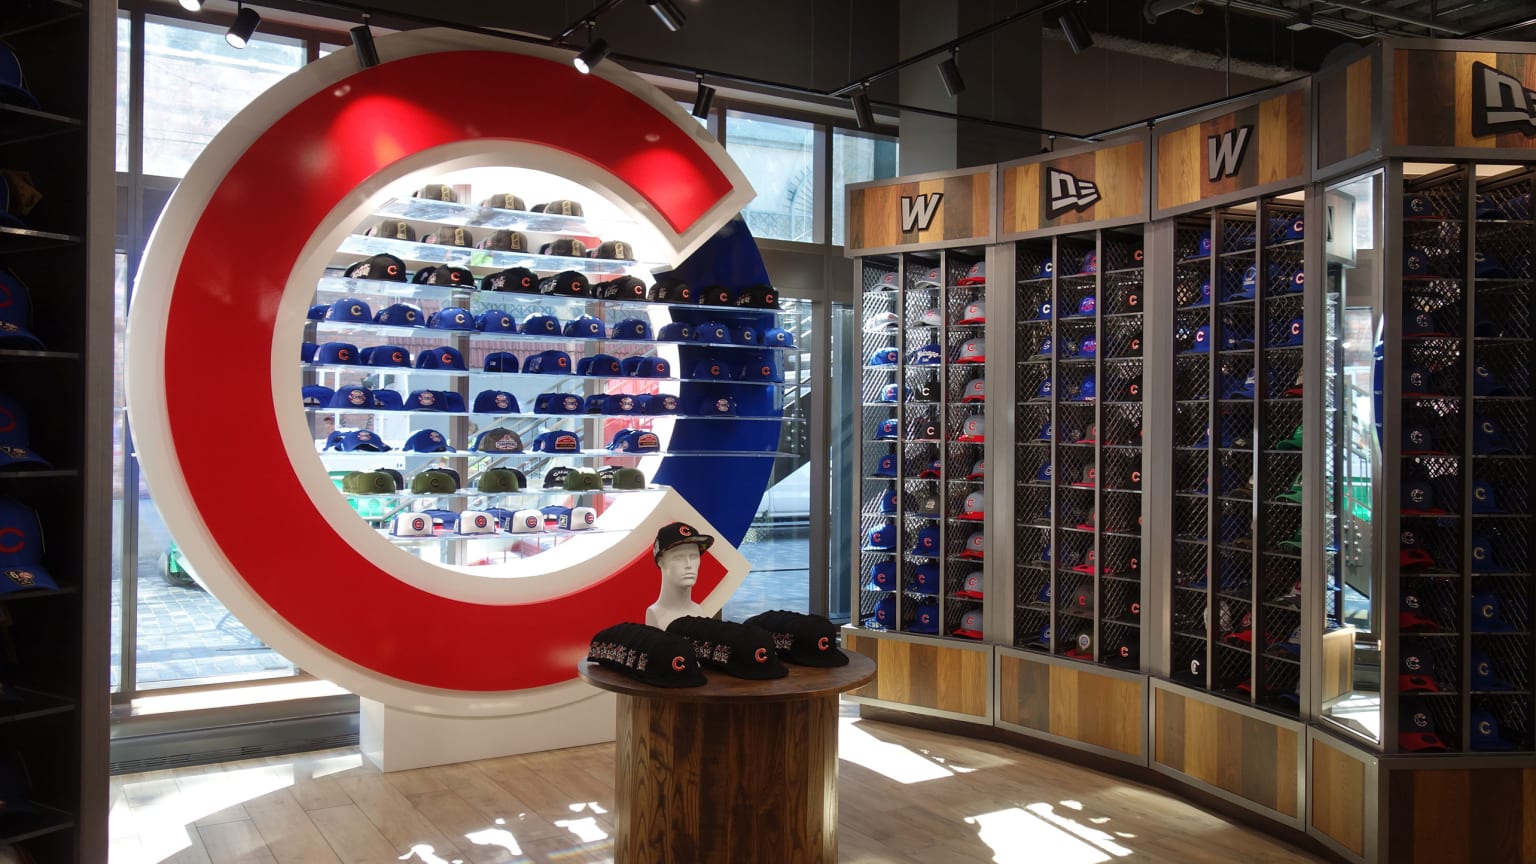 Chicago Cubs Flagship Store, 633 N Michigan Ave, Chicago, IL